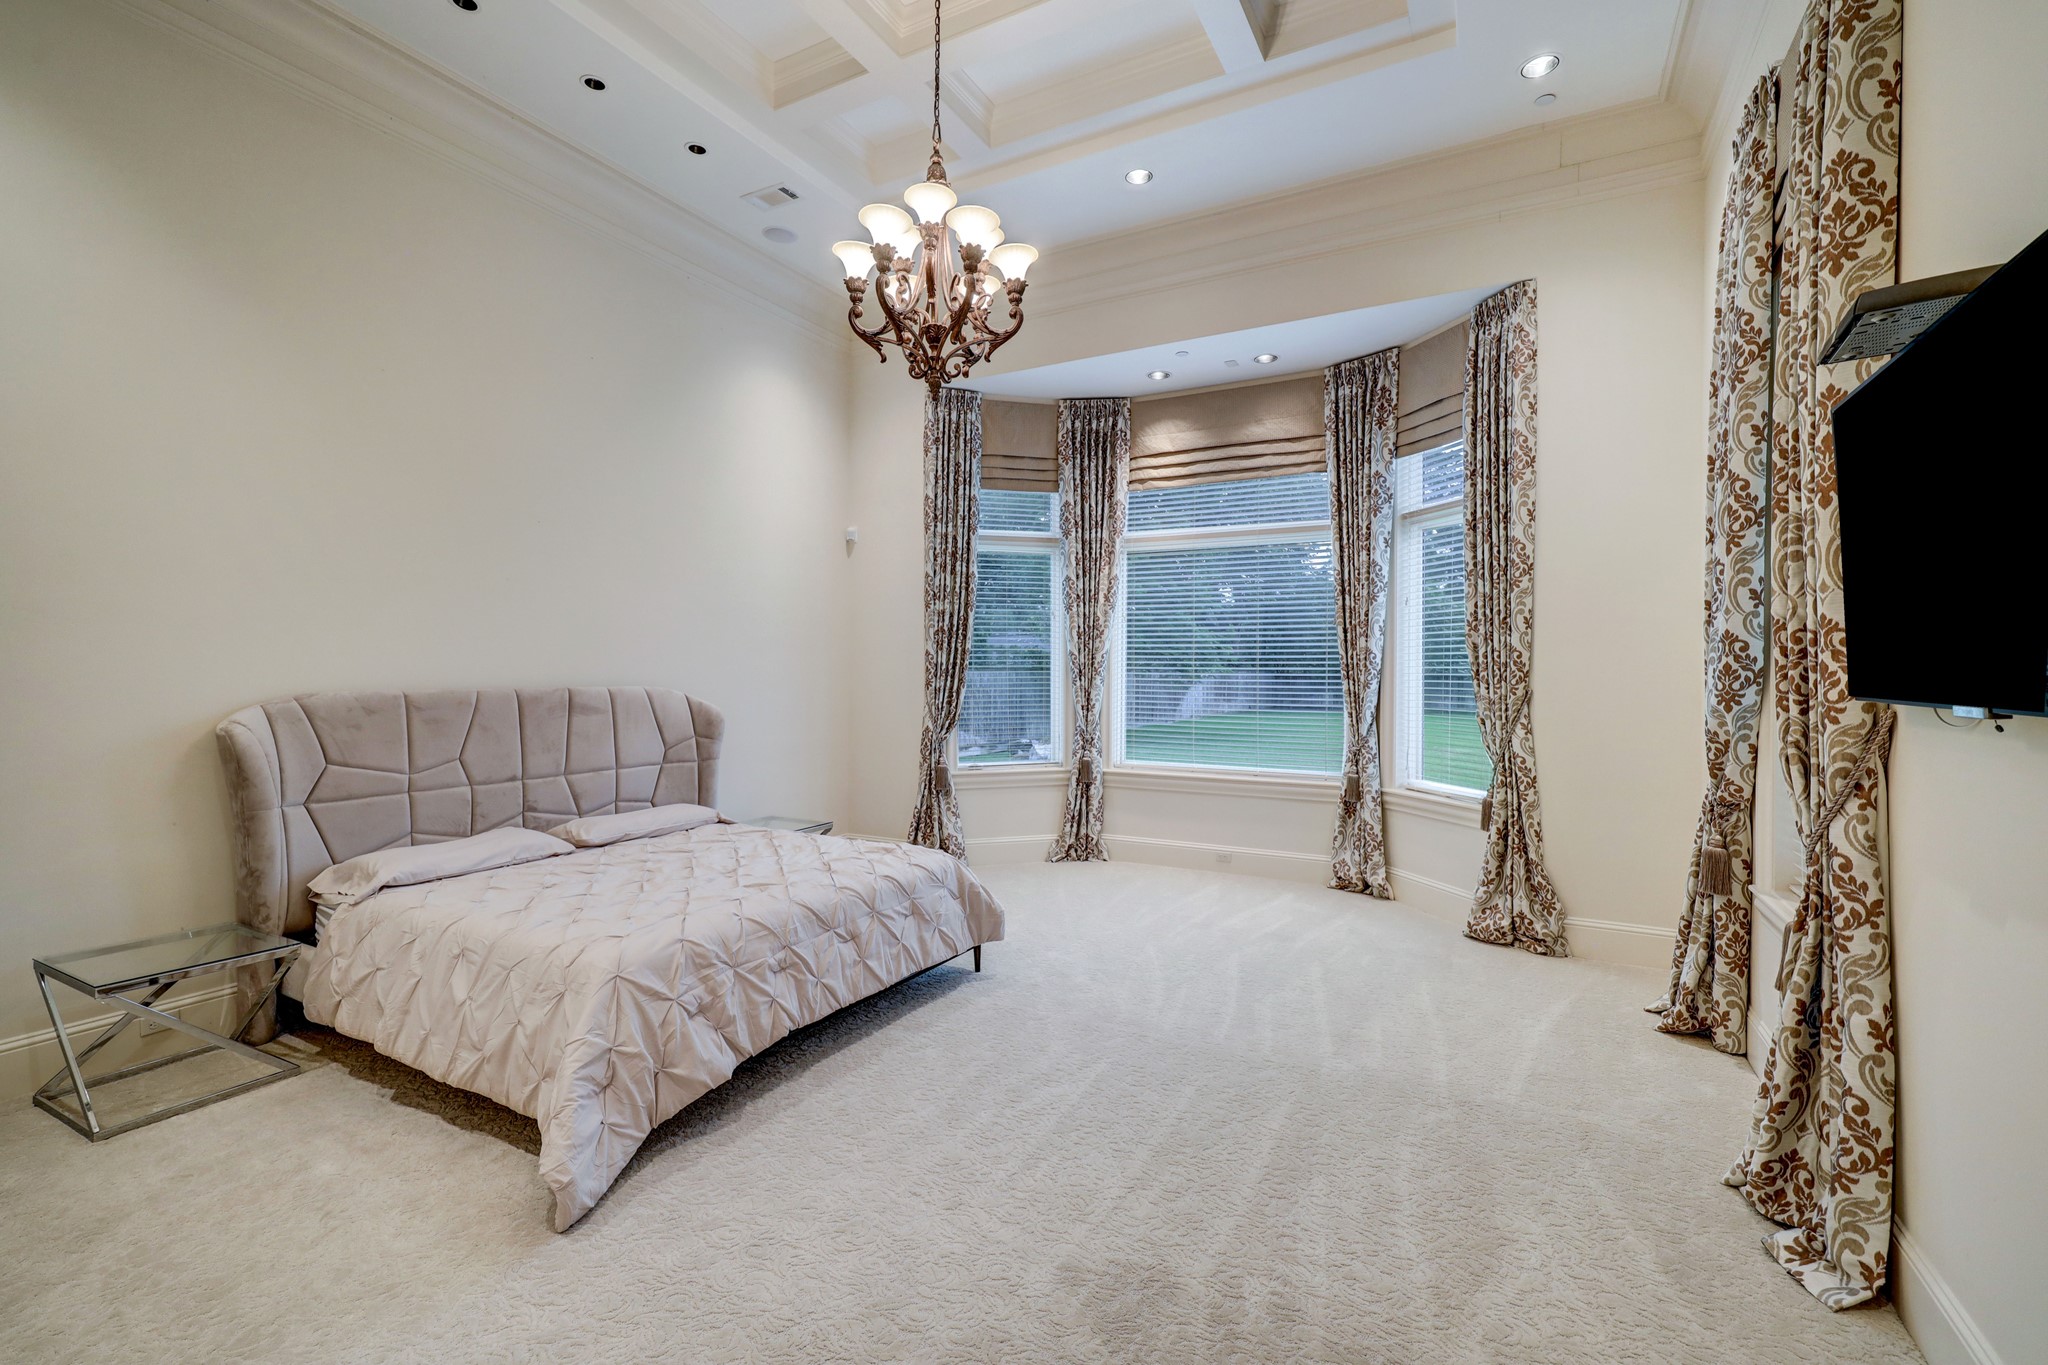 The Primary Bedroom is located on the first floor and features coffered ceilings, carpet, bay windows and a spa-like en-suite bathroom.